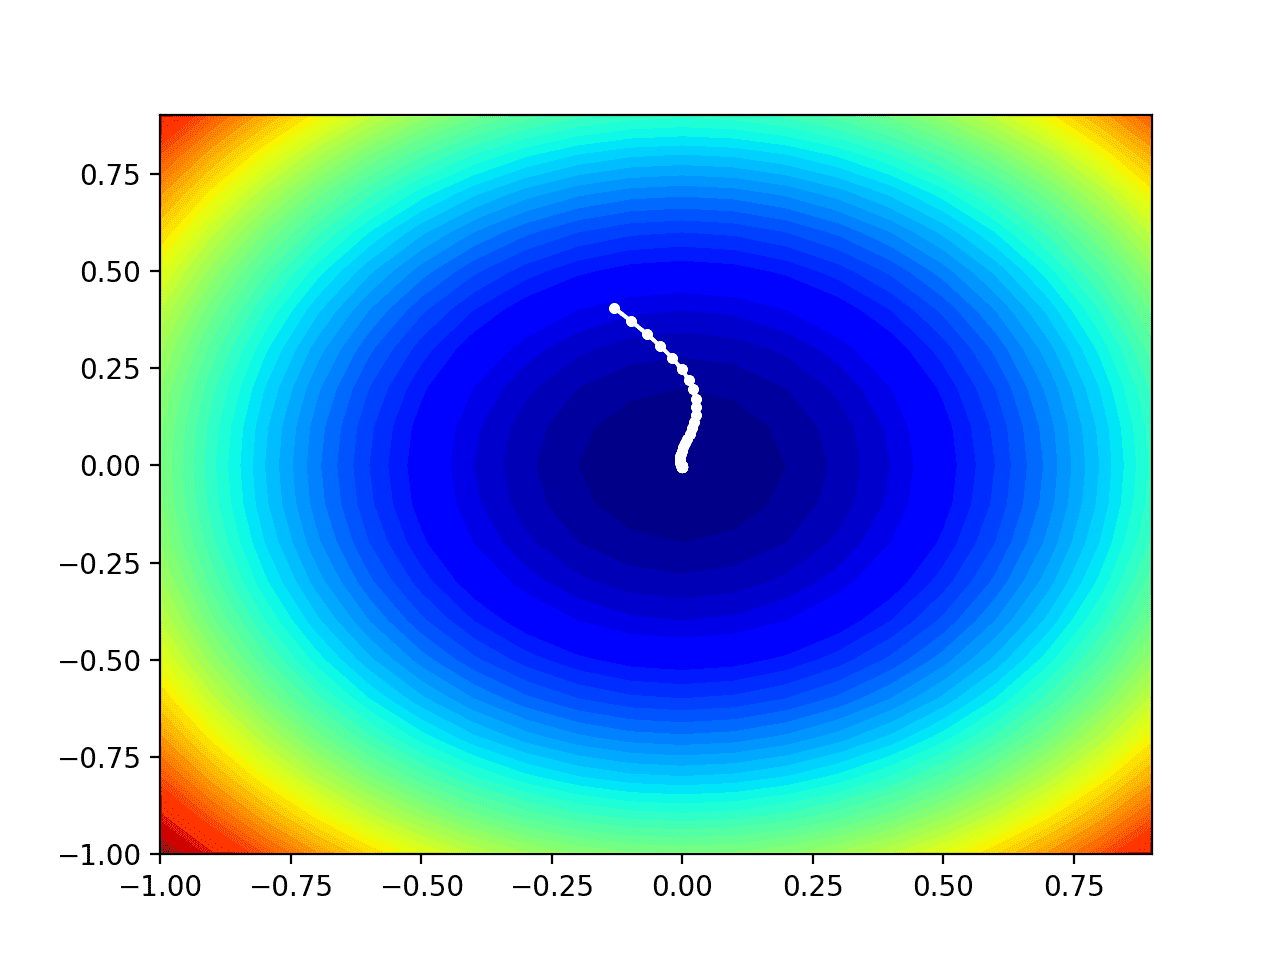 Contour Plot of the Test Objective Function With Nadam Search Results Shown